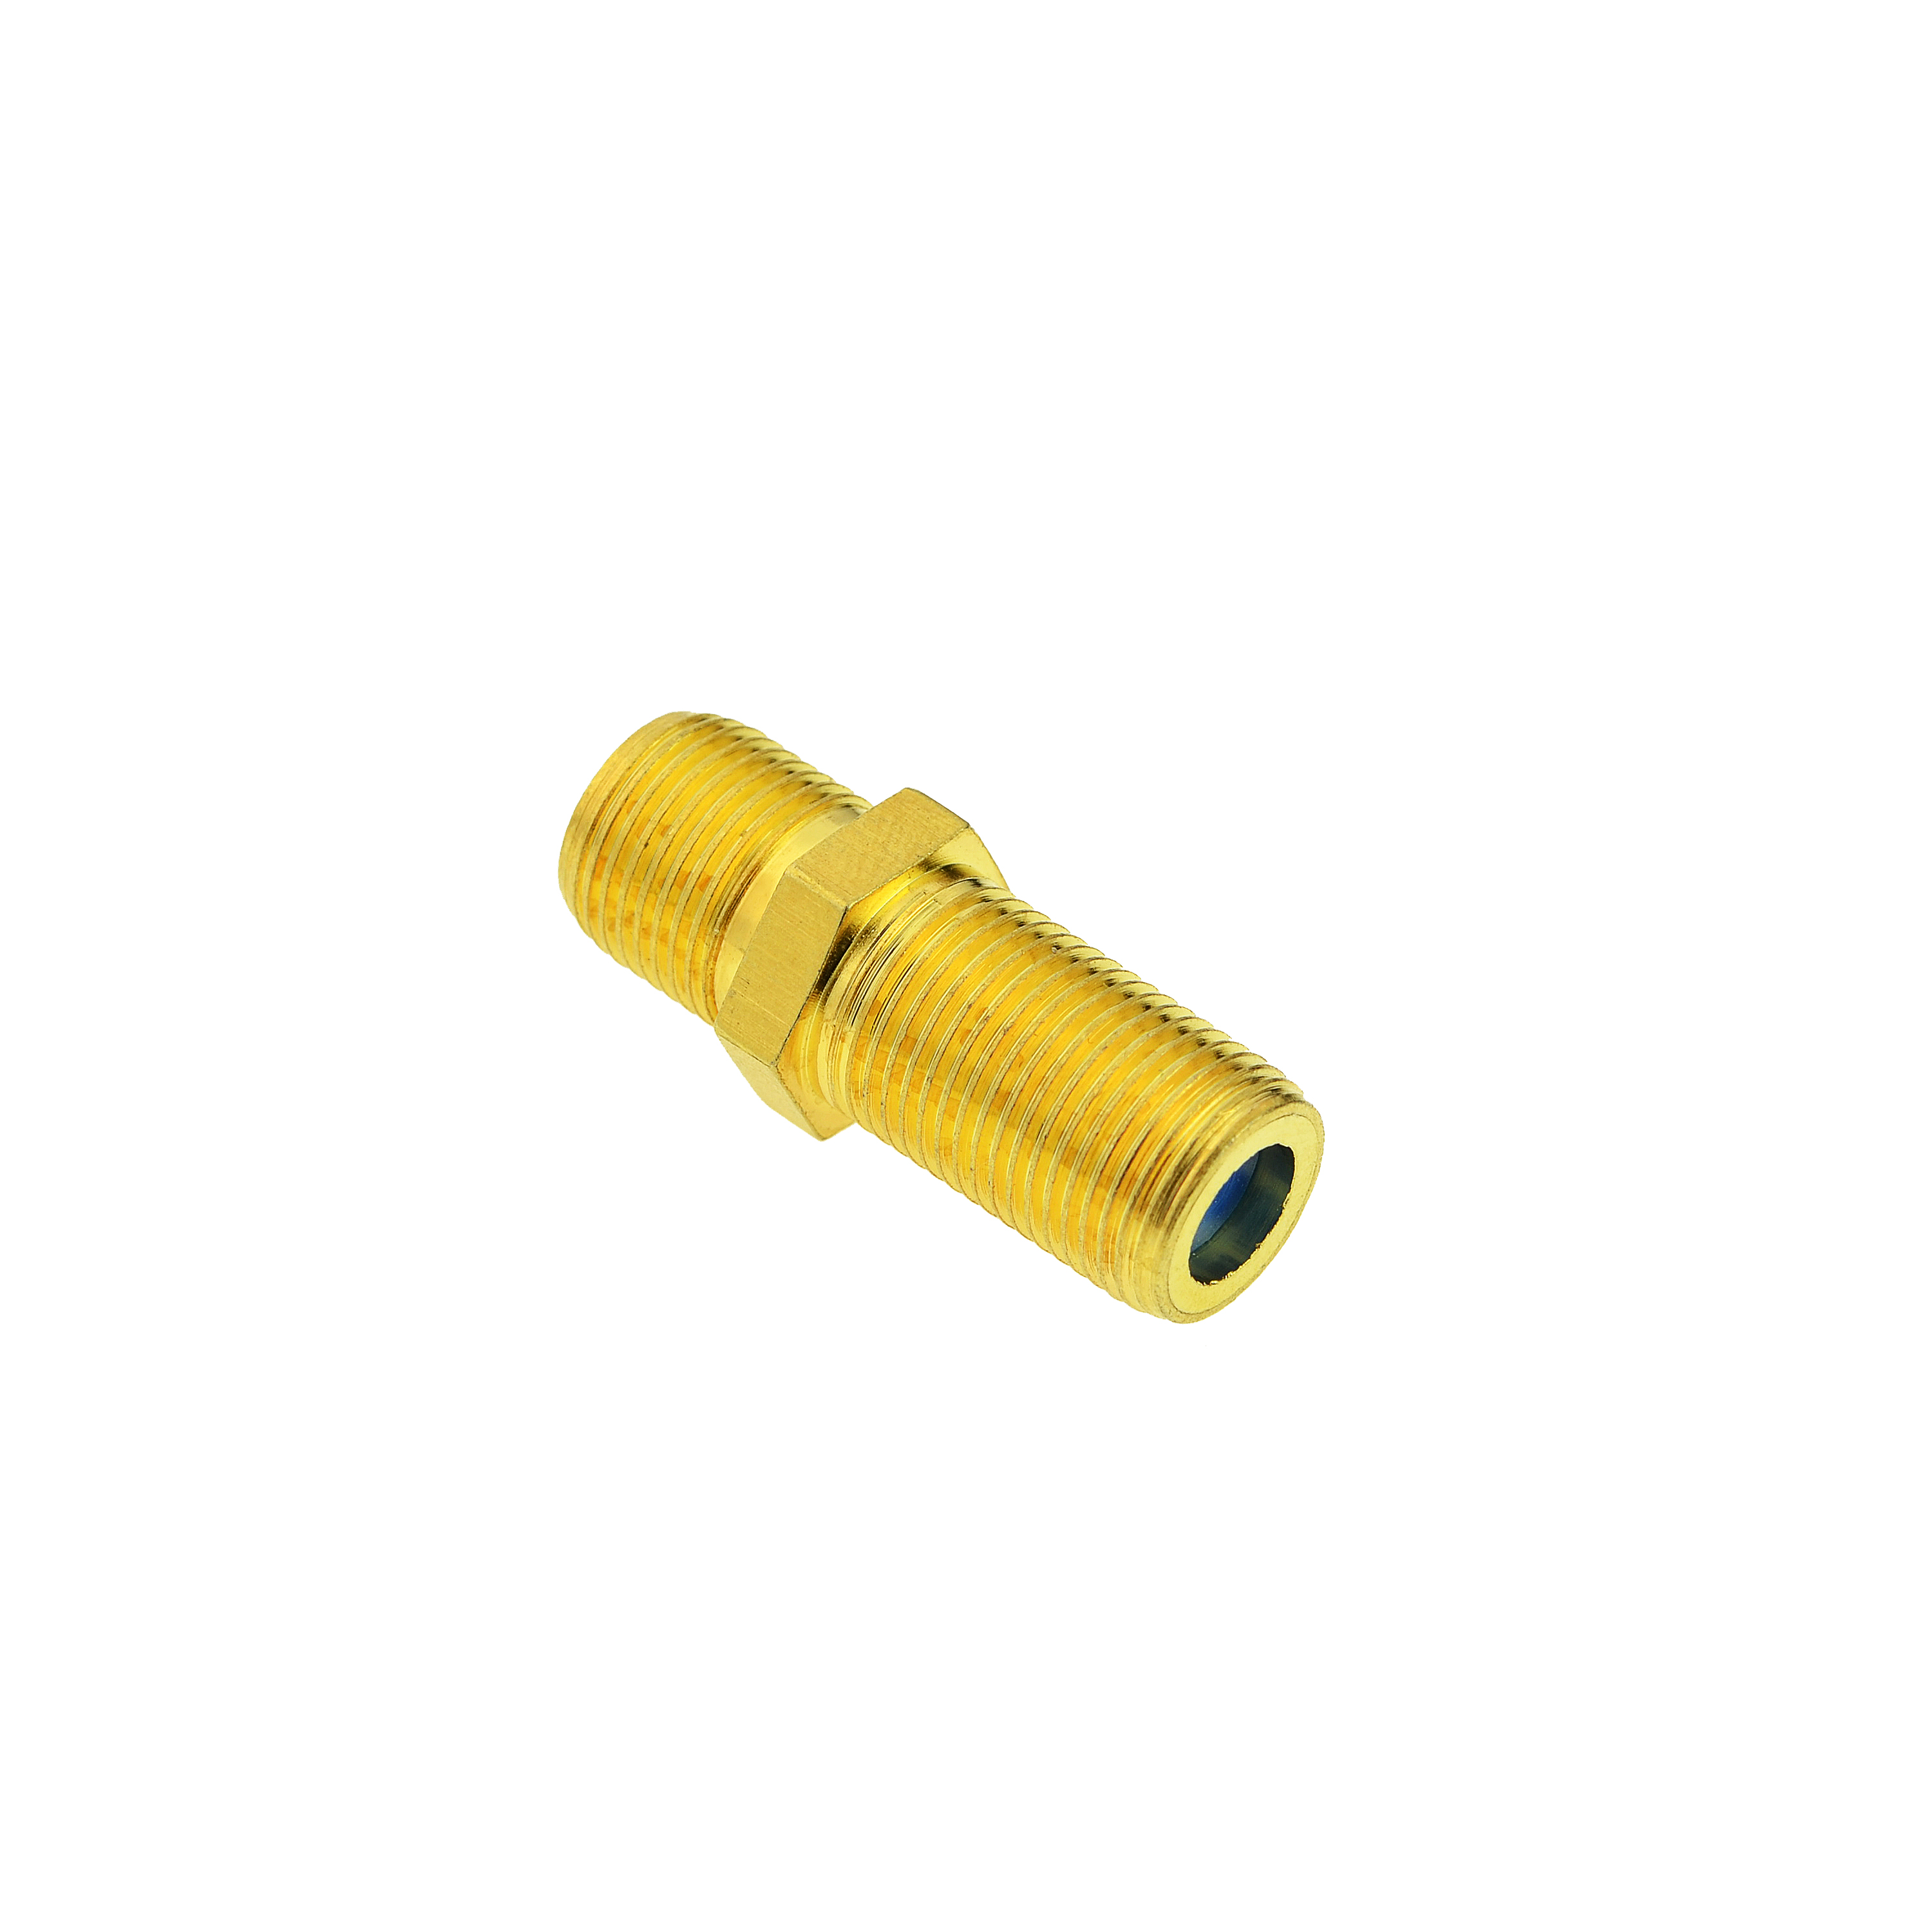 gold f connector